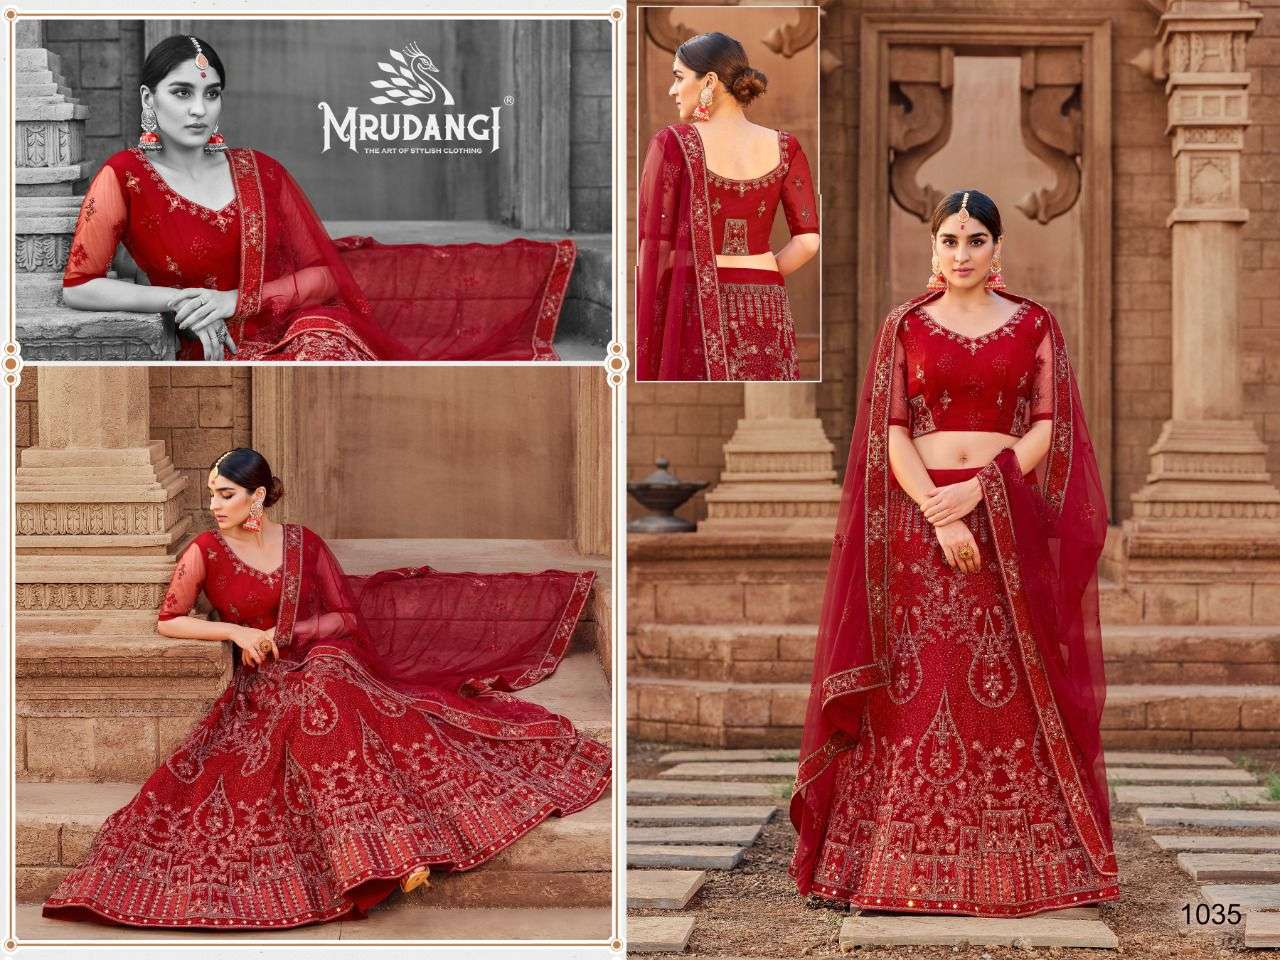 Buy south special orgenza lehengas online at best rate from fab funda surat